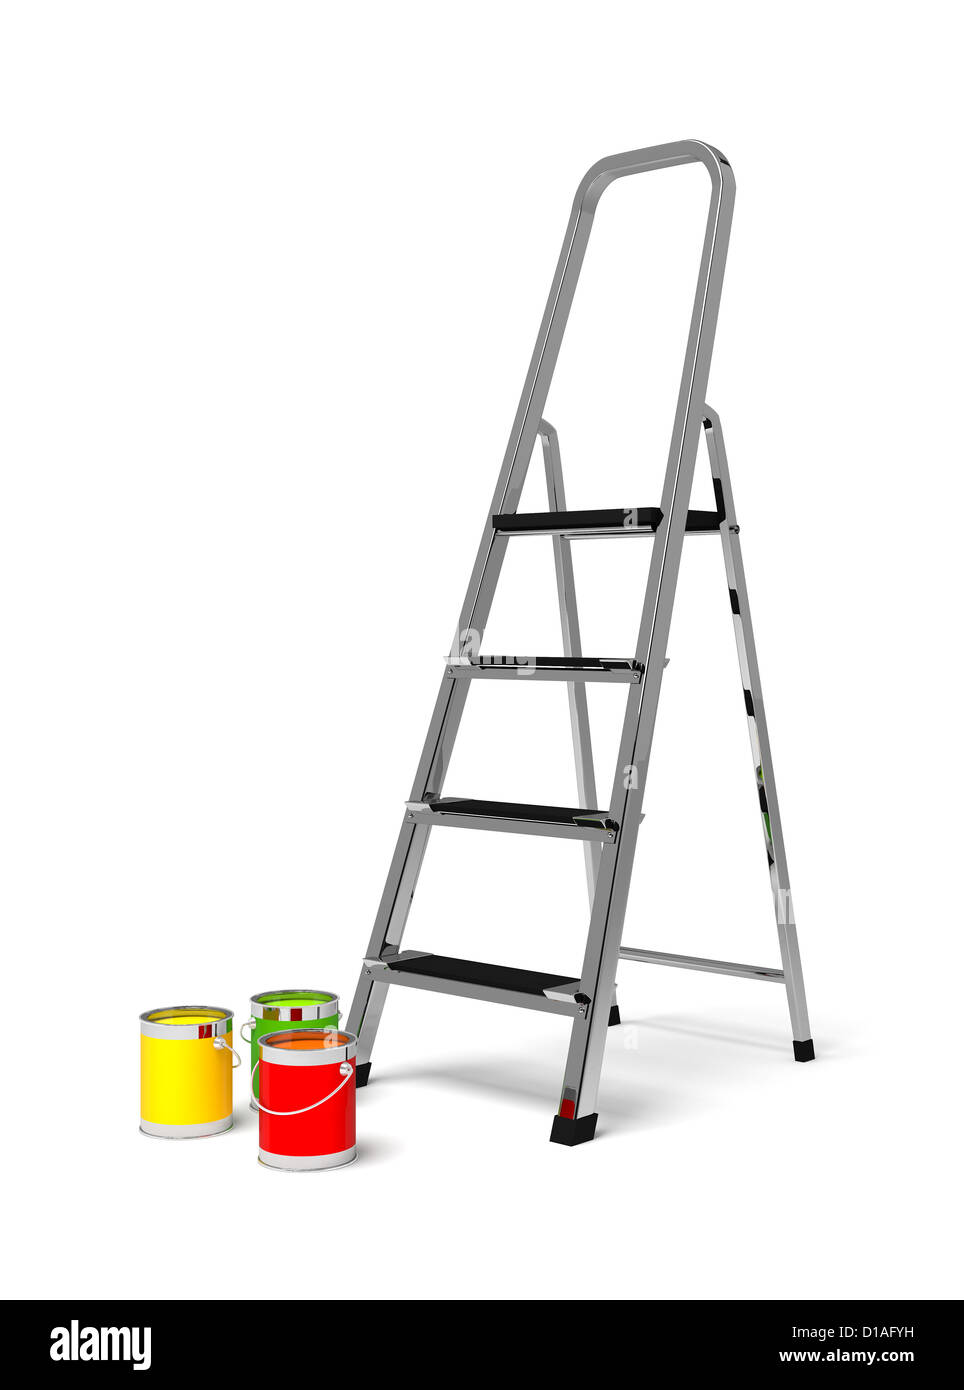 metal stairs stepladder and paint Stock Photo